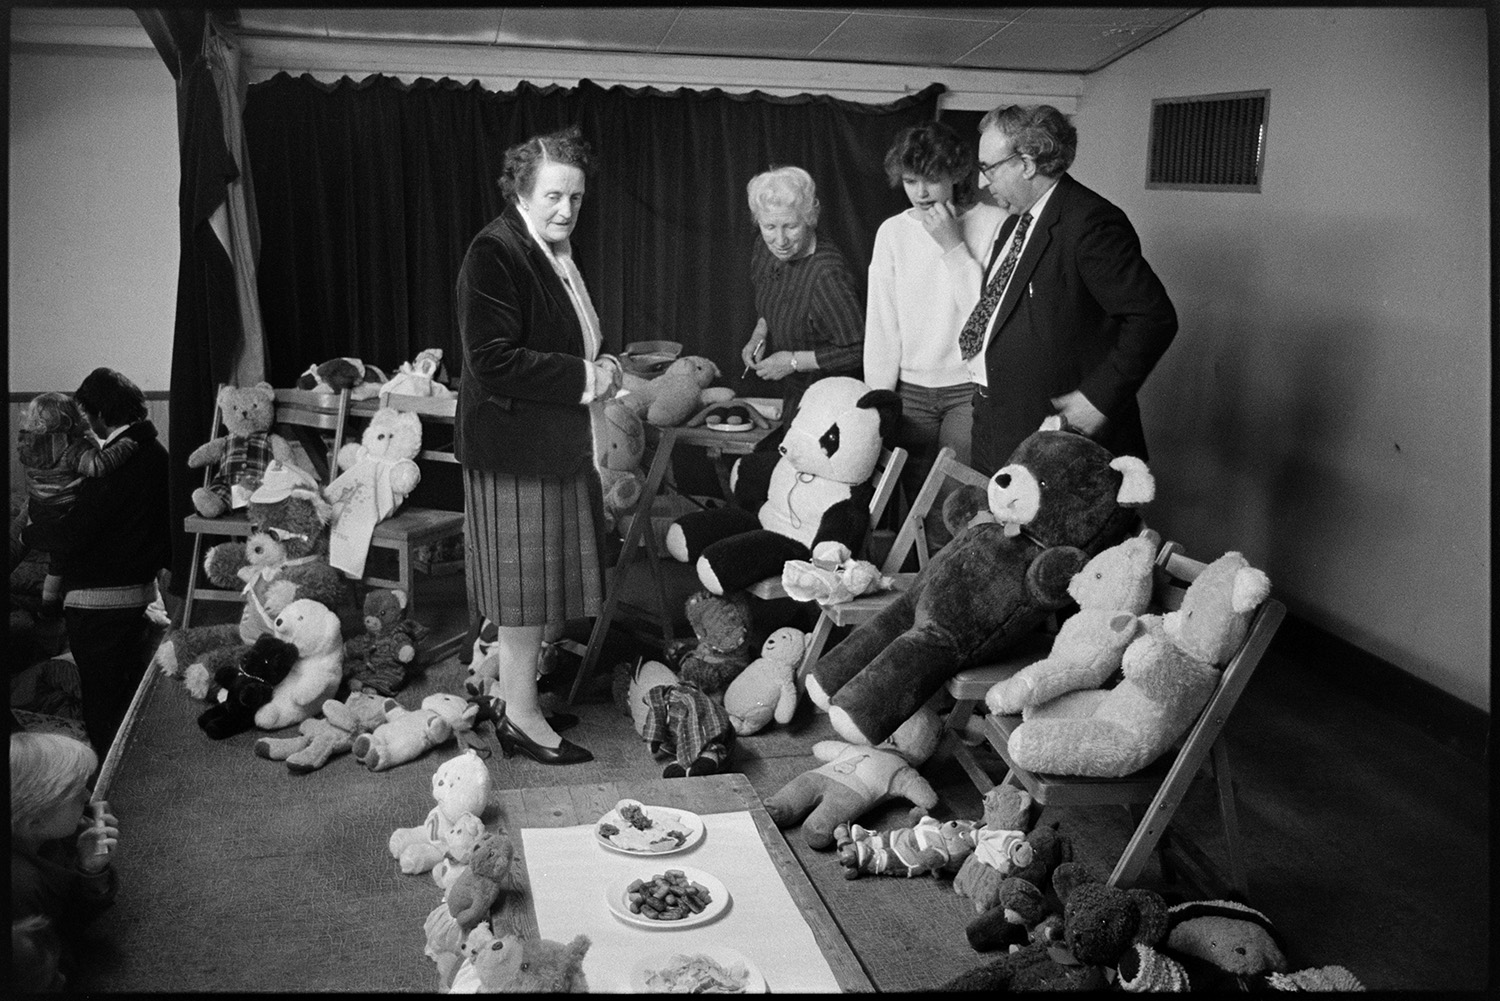 Easter show in village hall teddy bears party, competition for the oldest bear.
[Three women and a man looking at a collection of teddy bears which have been entered into a Teddy Bears Party Competition for the oldest bear, in the Easter Show at Dolton Village Hall.]